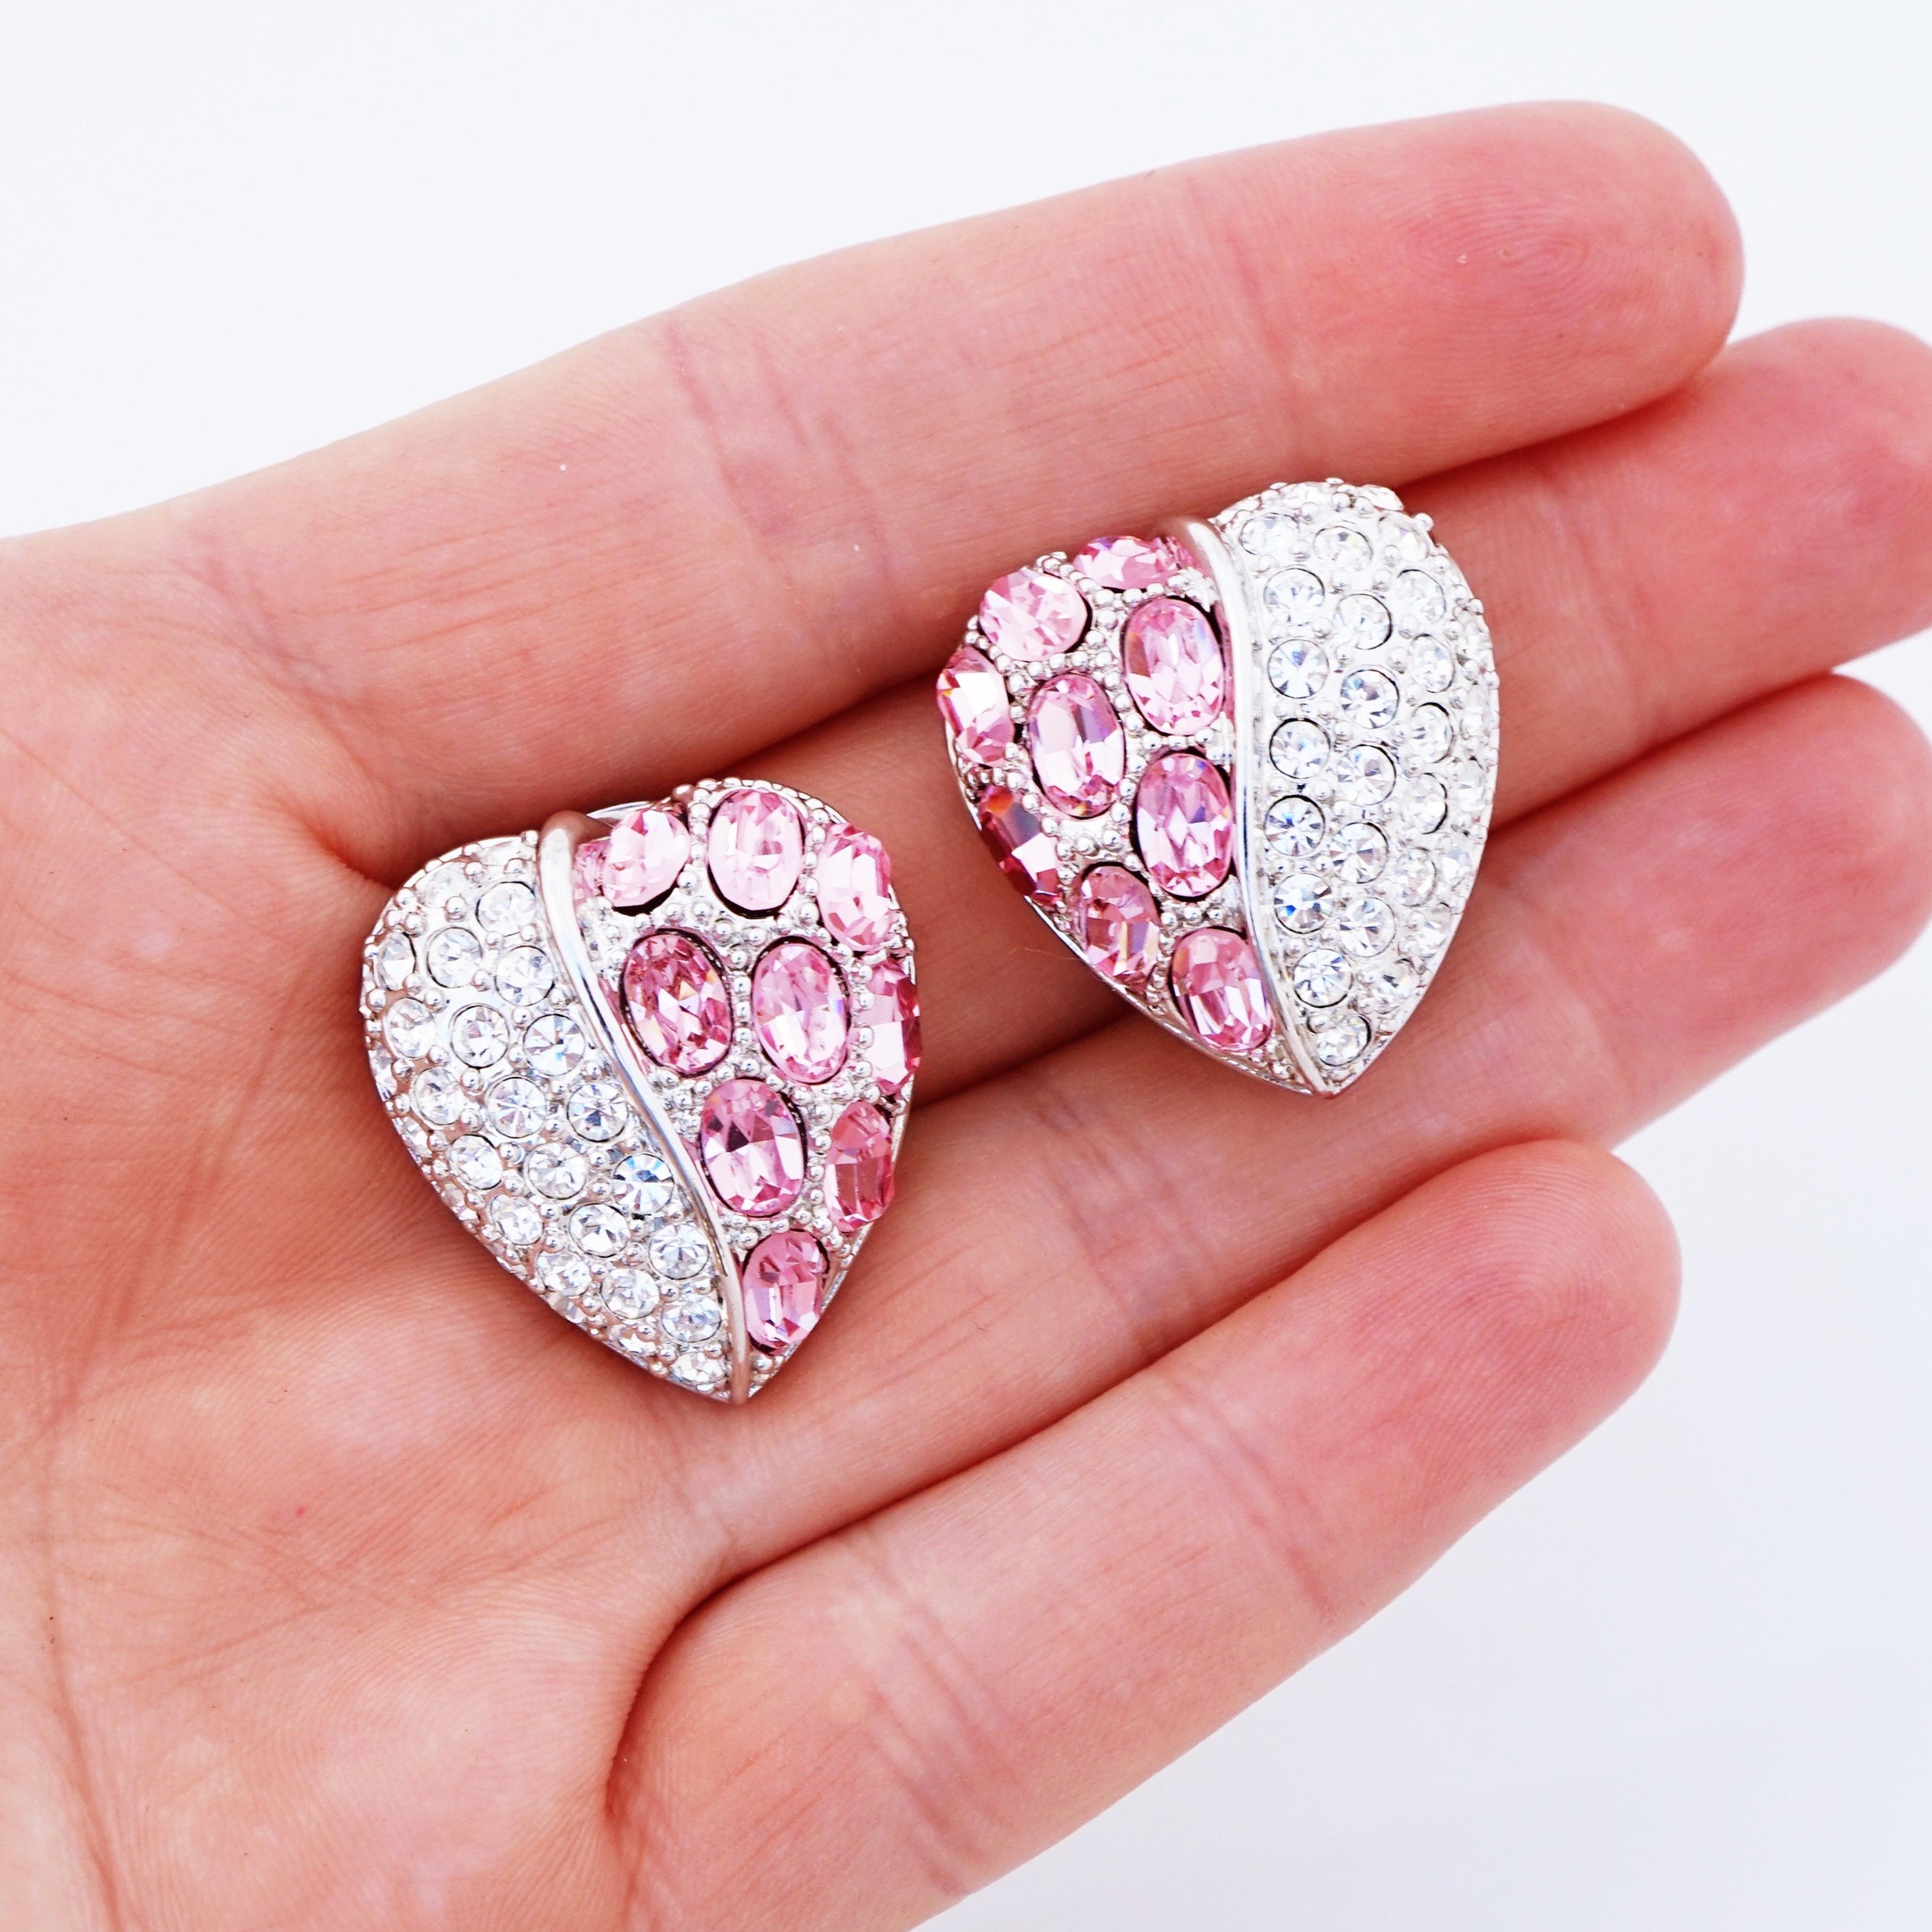 Silver Heart Statement Earrings With Pink Crystal Pavé By Nolan Miller, 1980s 1